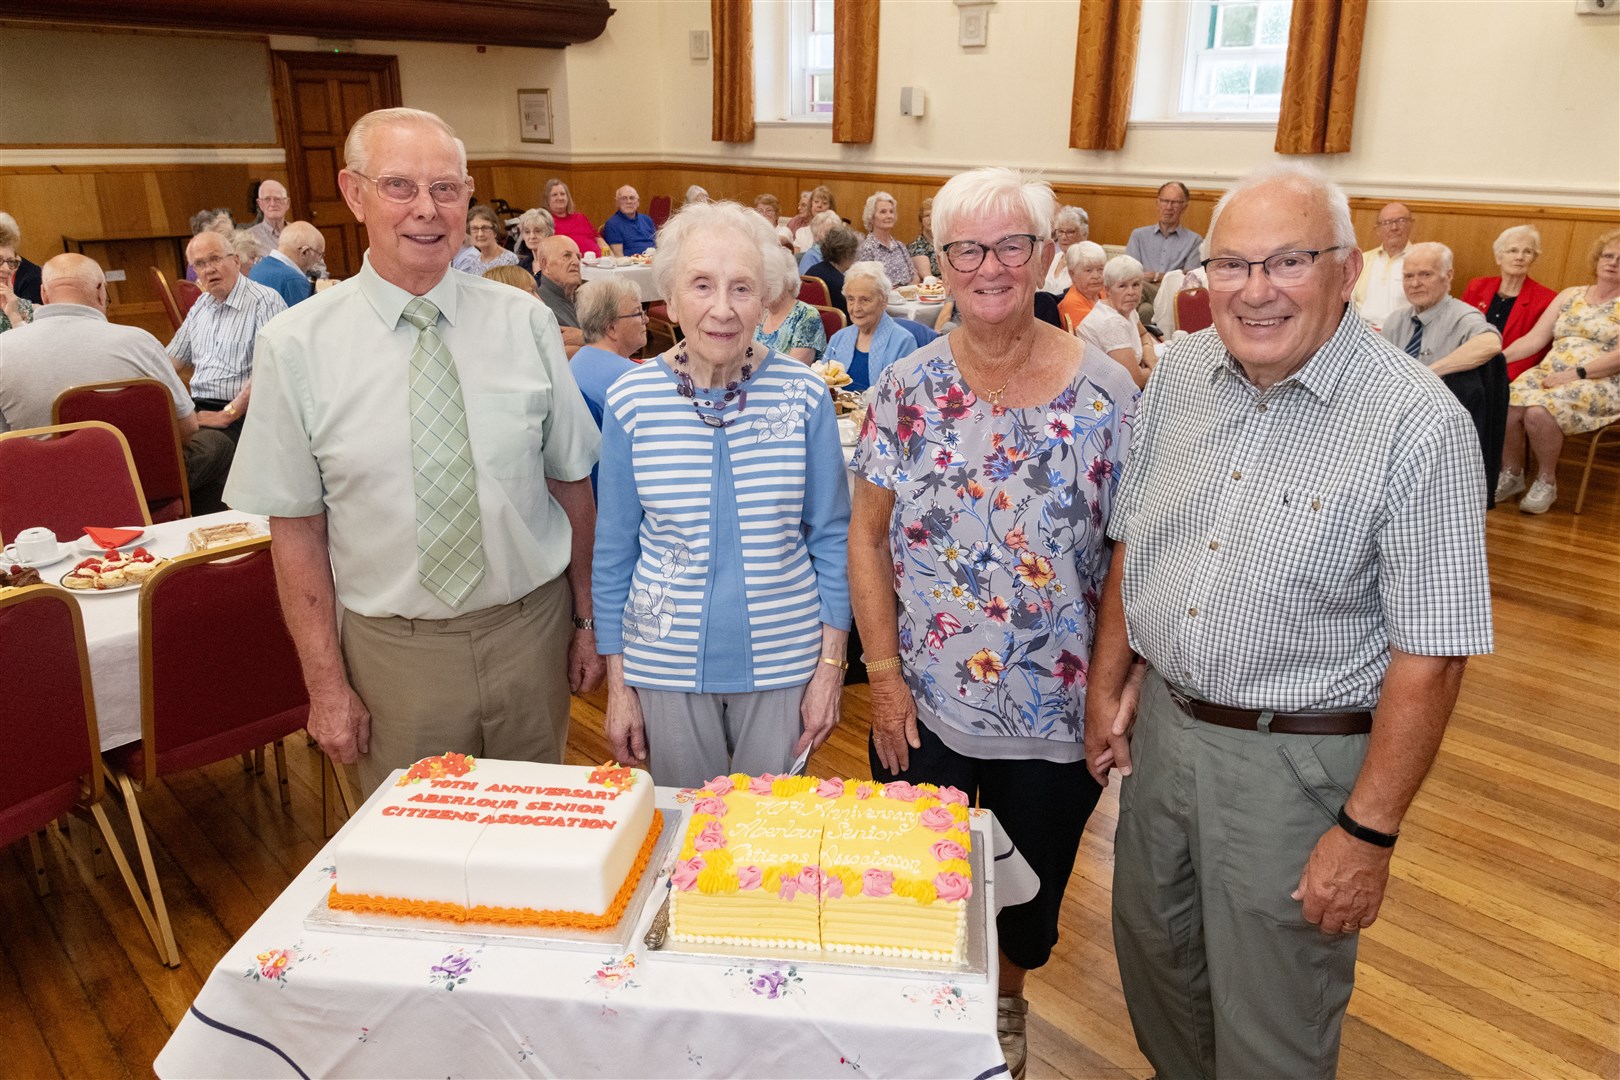 From left: Bill Taylor (Secretary), Margaret Stronach (President), Tina Hickson (Treasurer) and Stuart Hickson (Vice-President) at the 70th anniversary of the Aberlour Senior Citizens Association at Fleming Hall...Picture: Beth Taylor.